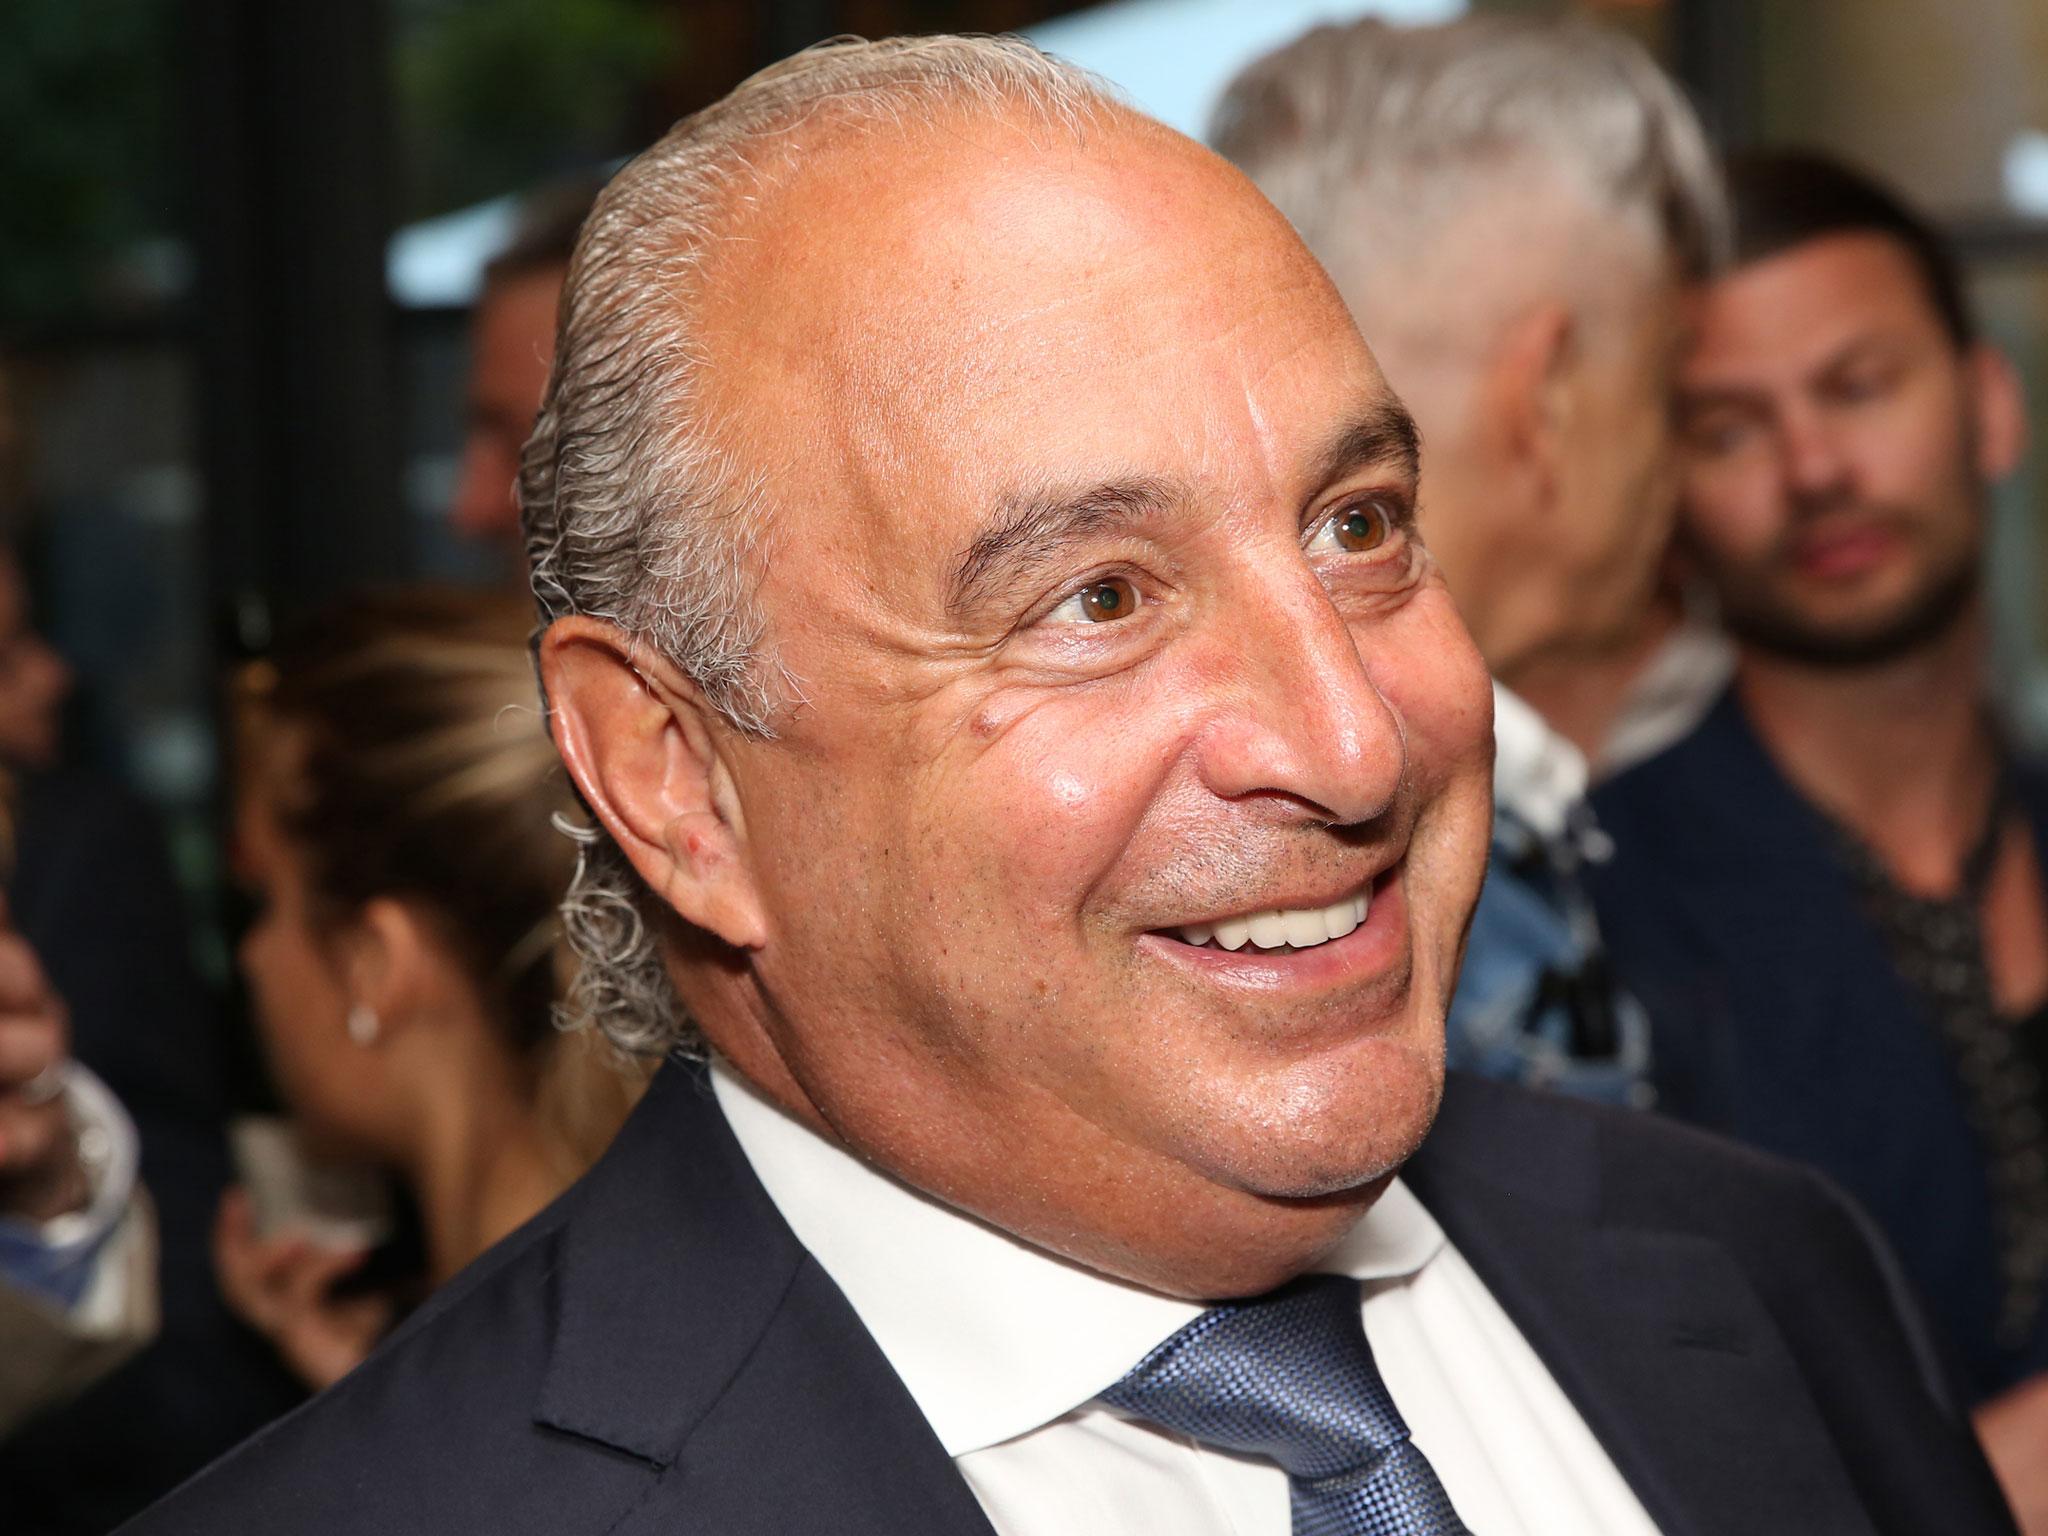 Sir Philip Green could be stripped of his knighthood